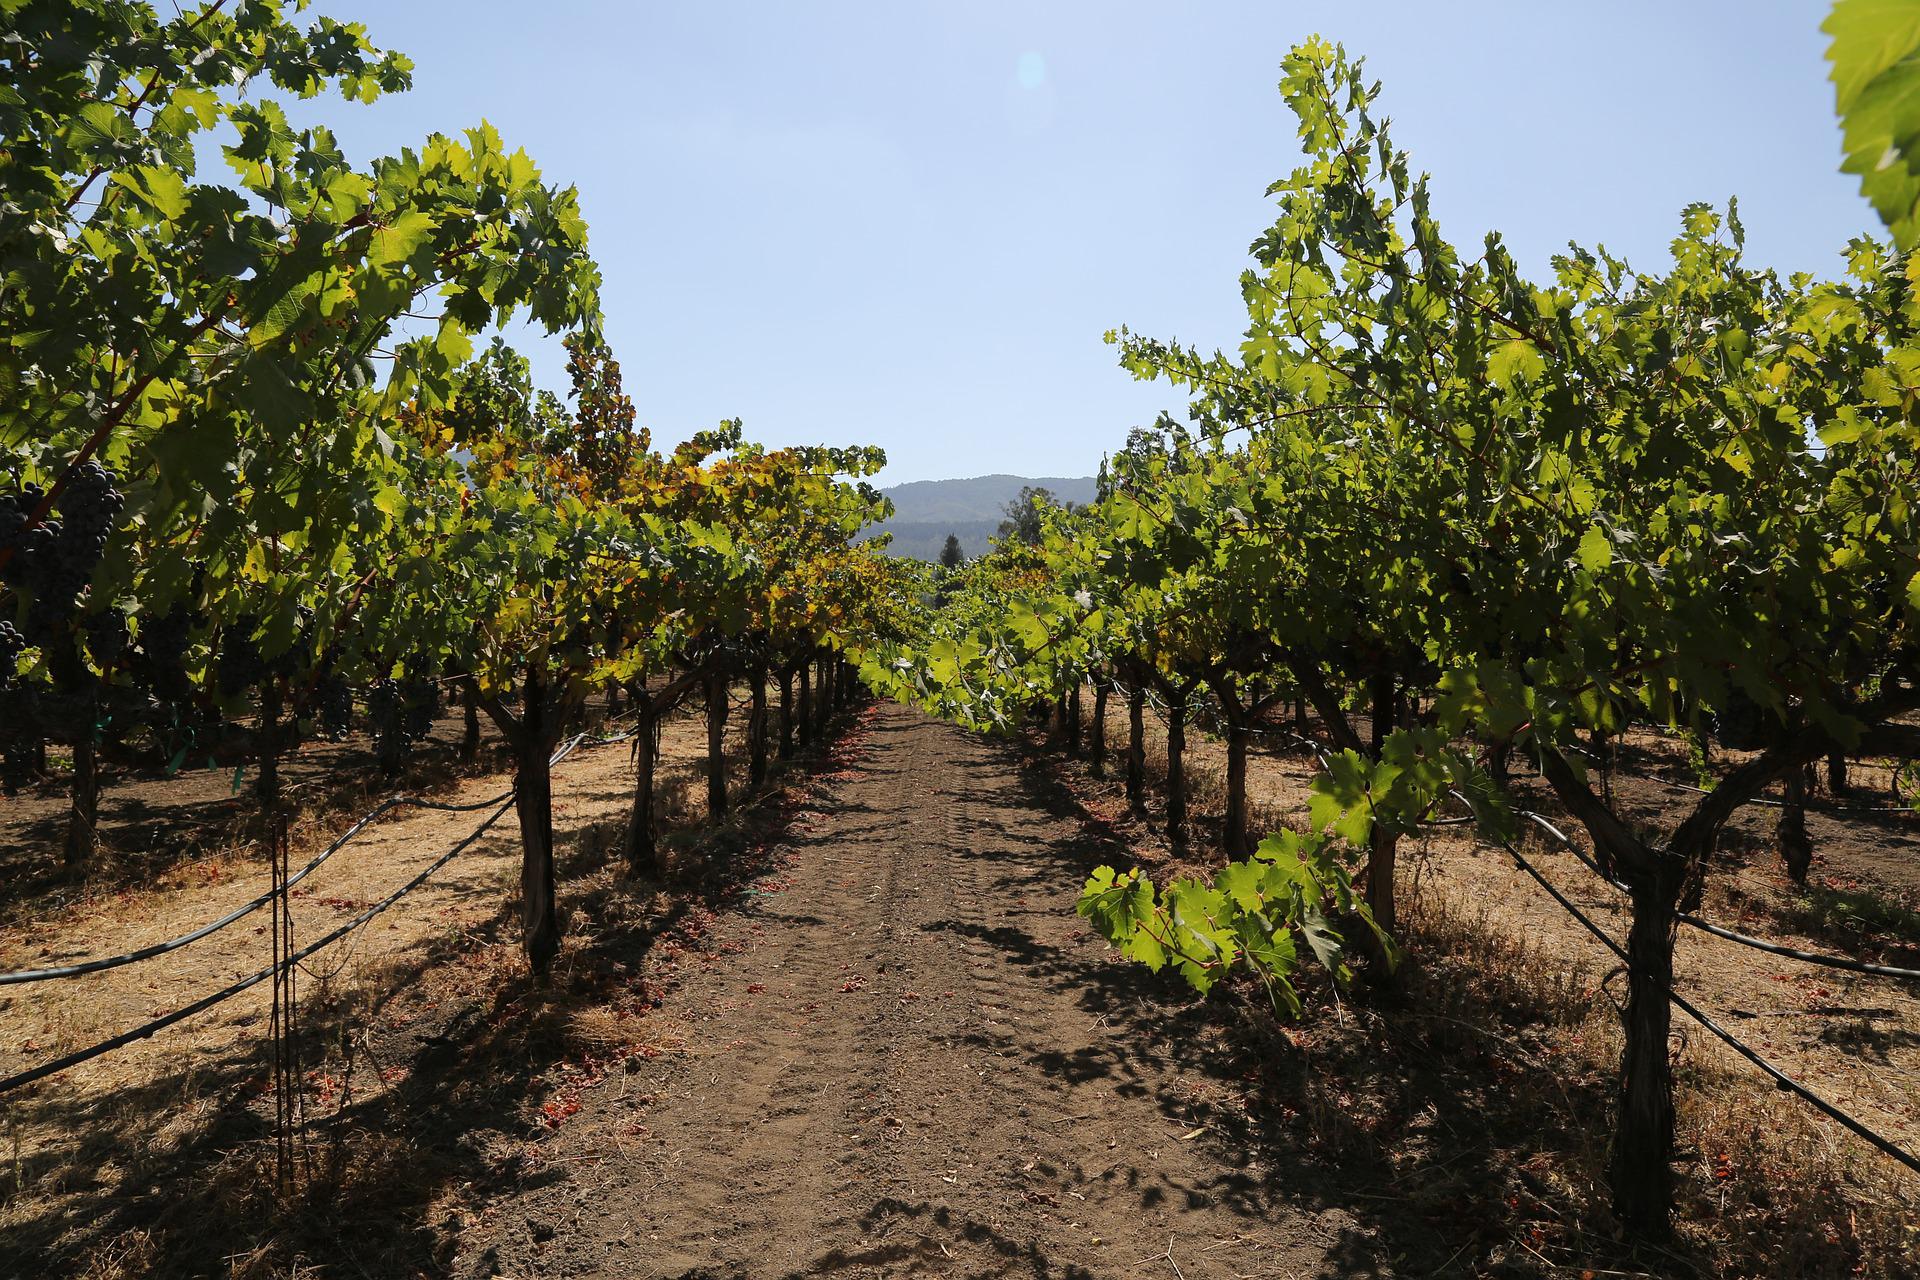 Sonoma Valley is known as the birthplace of wine in California